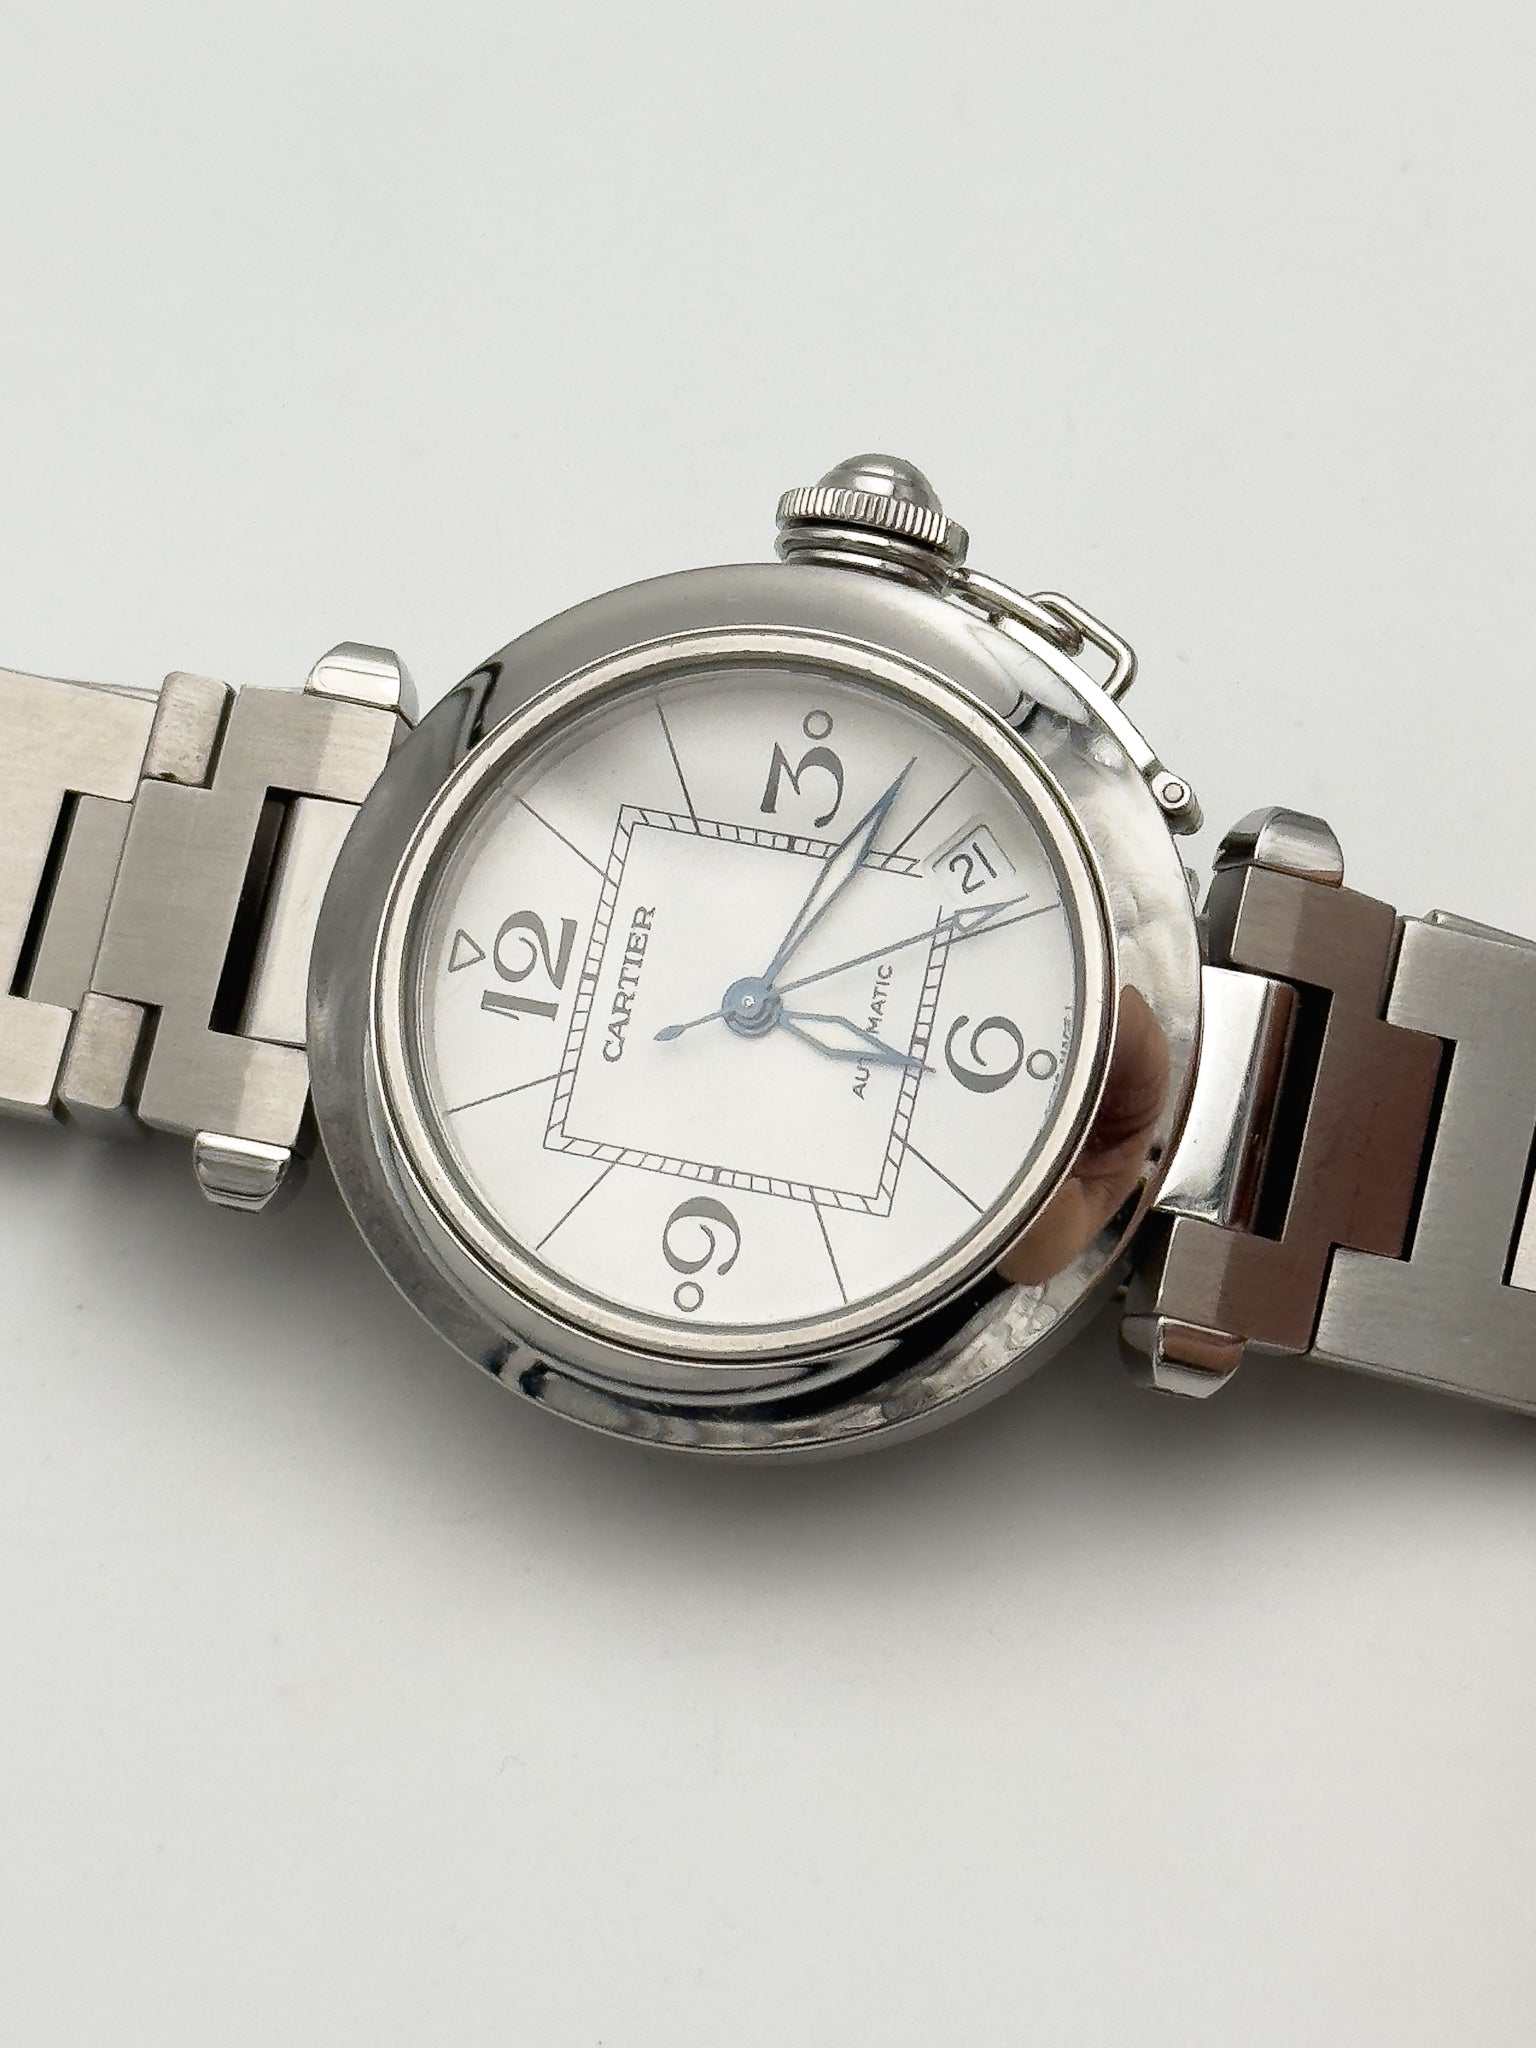 Cartier - Pasha Date White Dial - FULL SET - 2009 - Atelier Victor